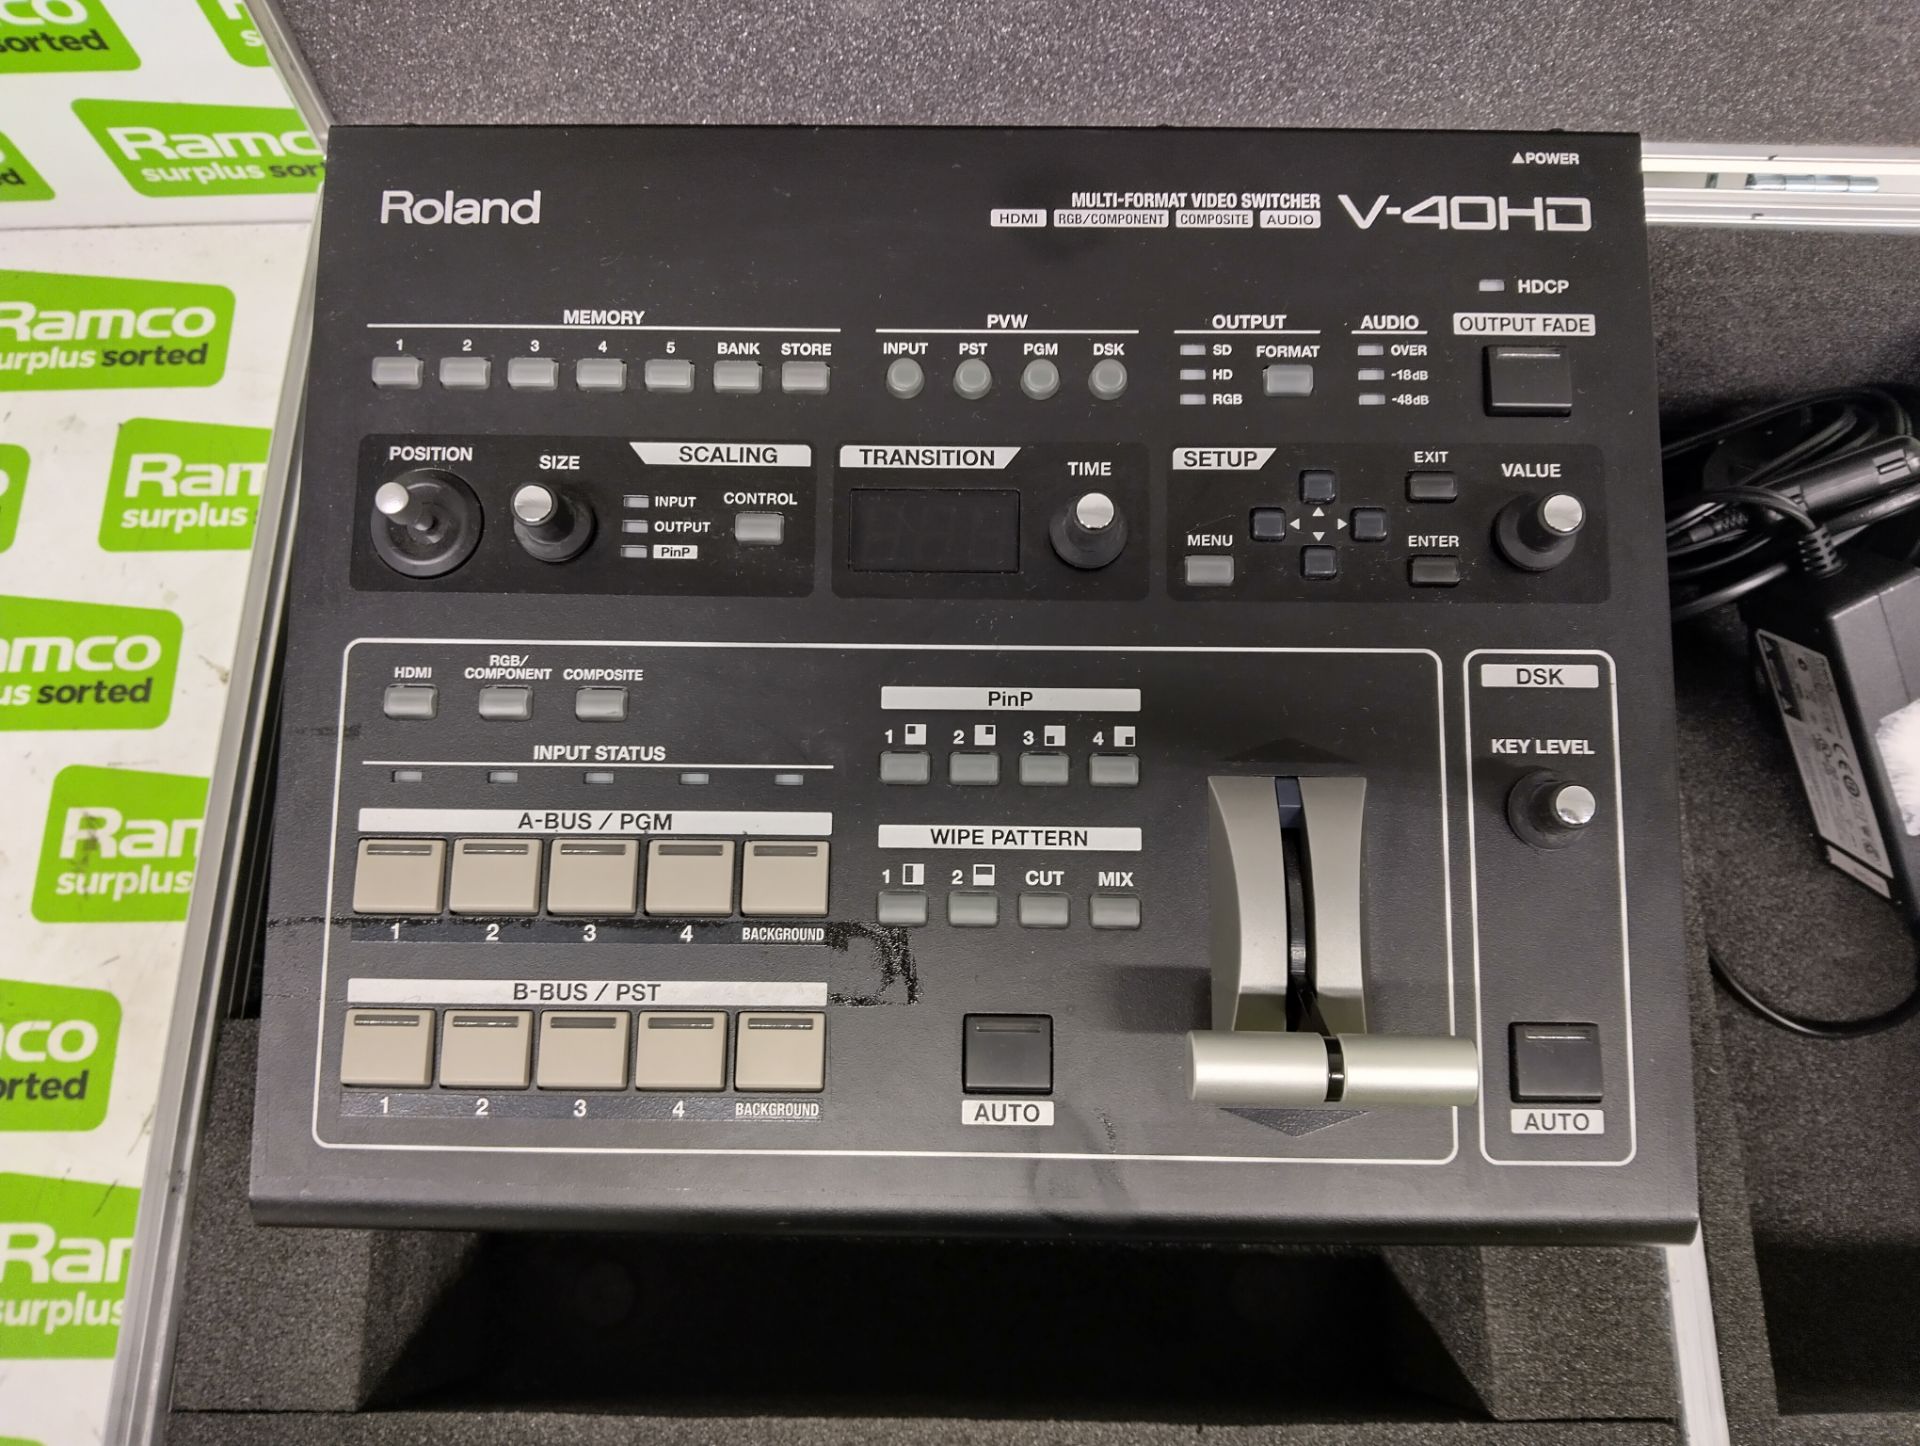 Roland V-40HD multi-format video switcher with flight case - Image 3 of 5